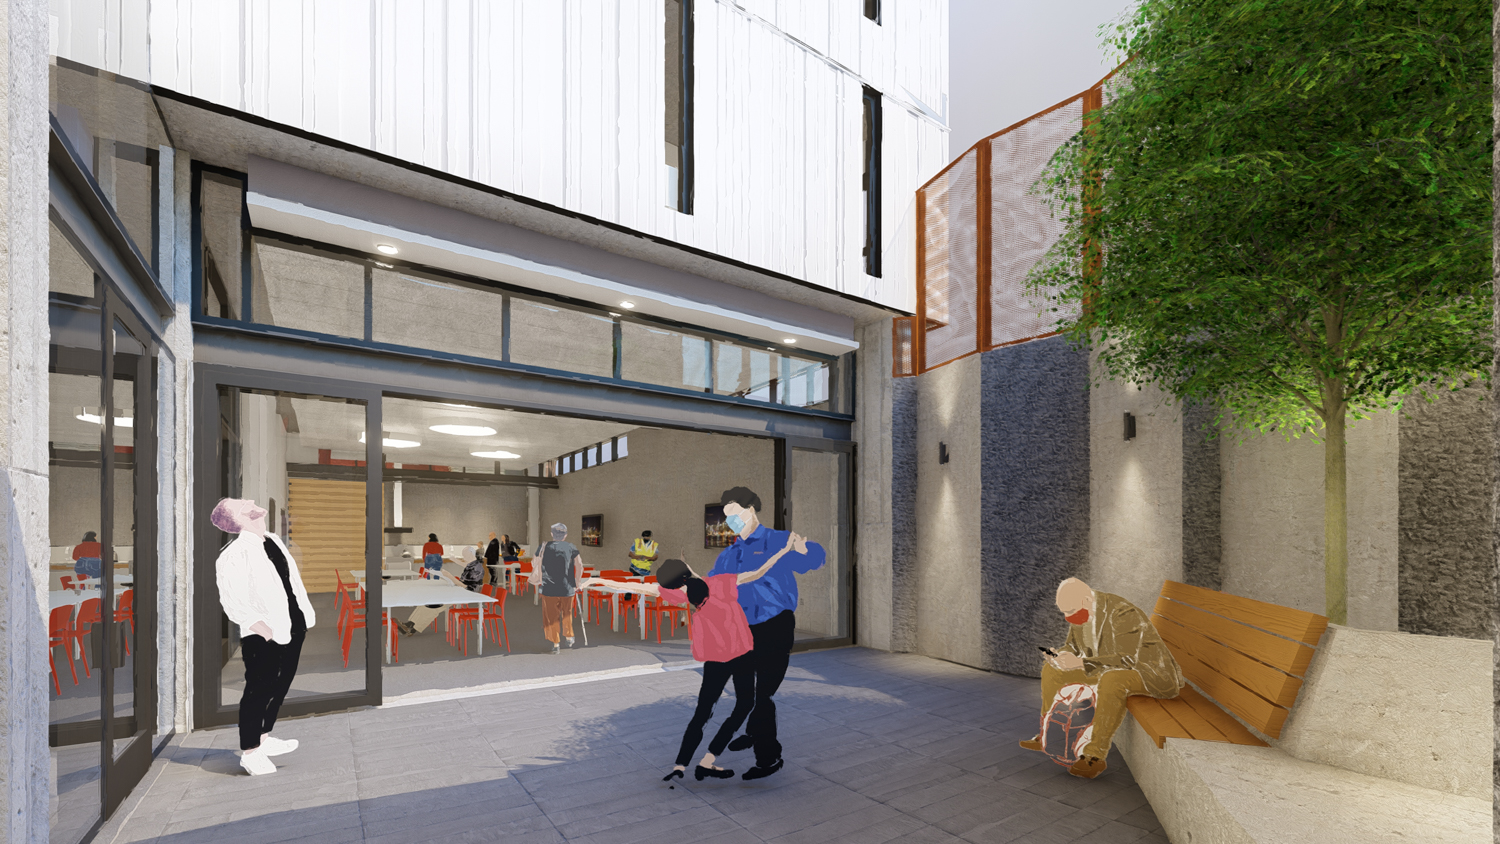 53 Colton Street open-air courtyard, rendering by David Baker Architects